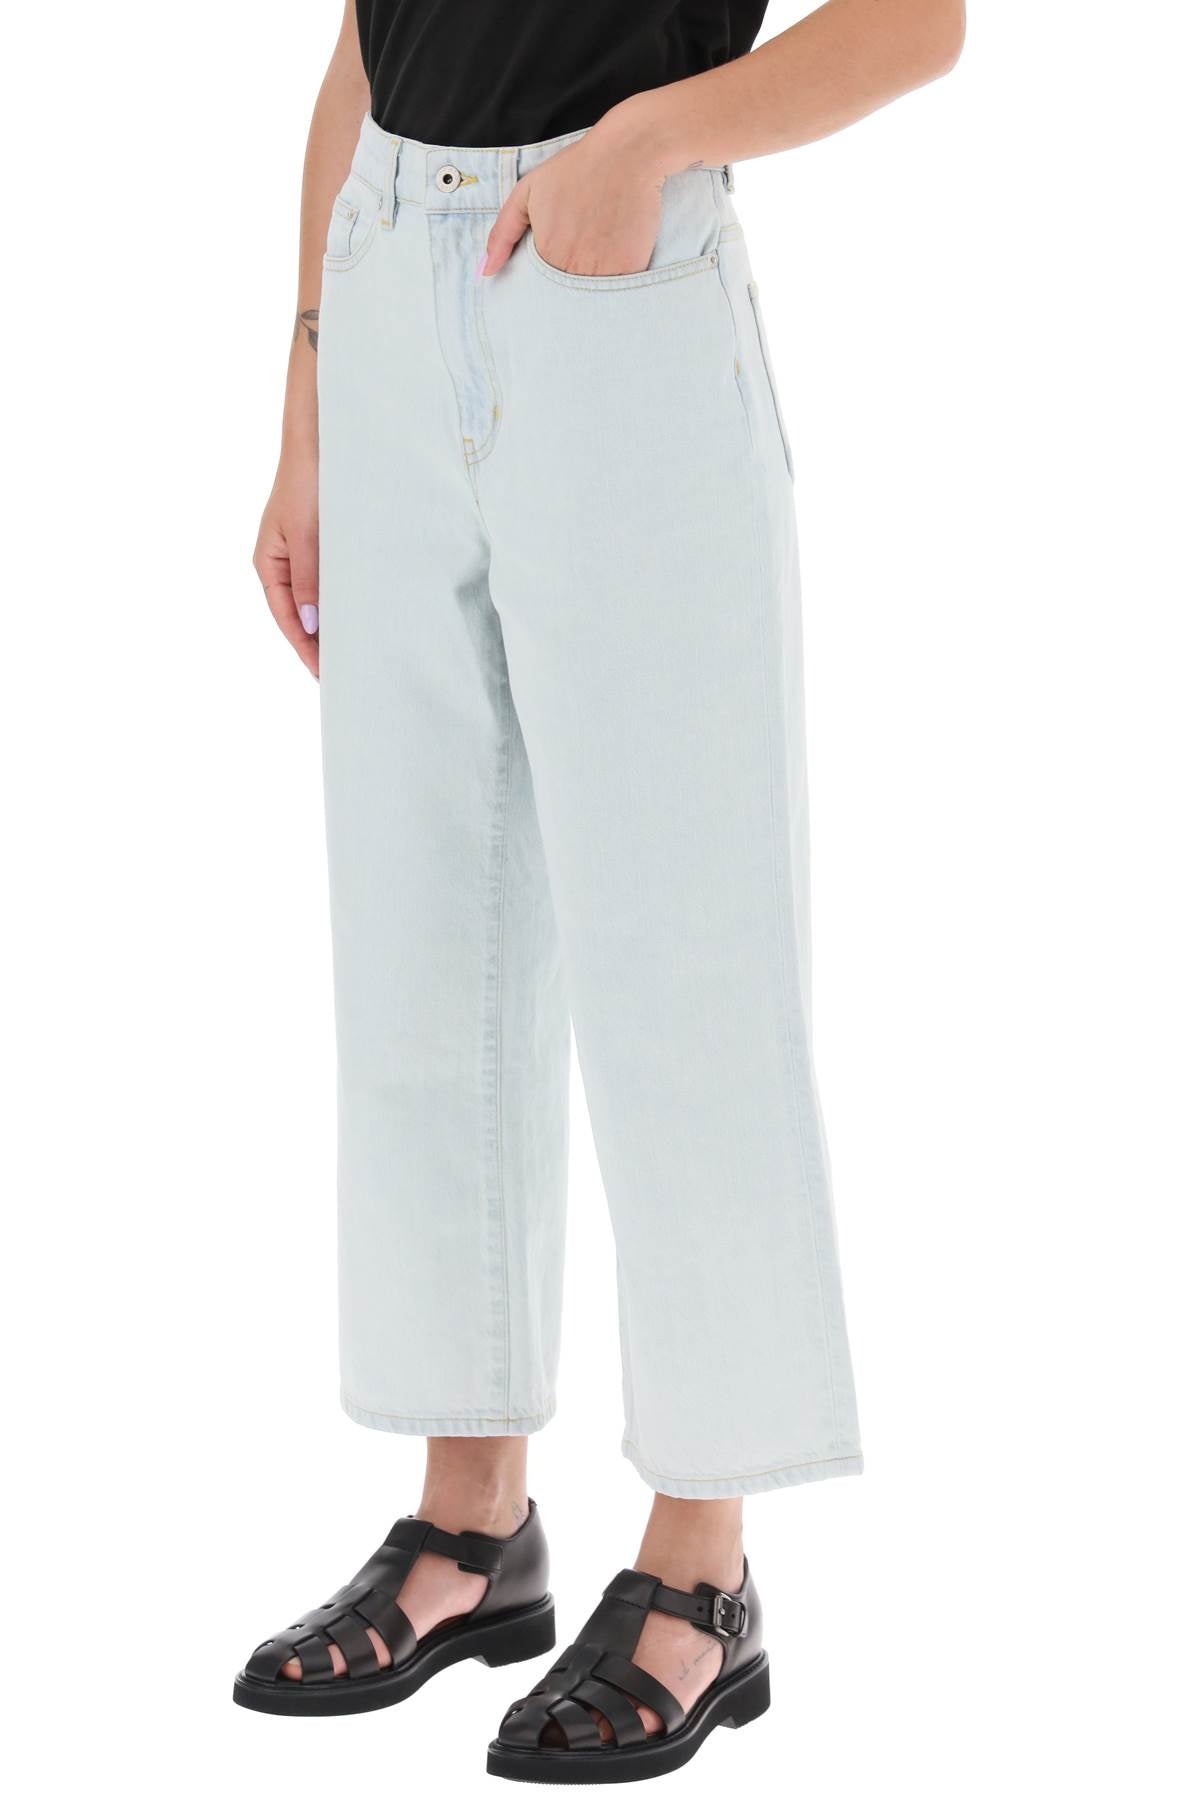 Kenzo 'sumire' cropped jeans with wide leg-3